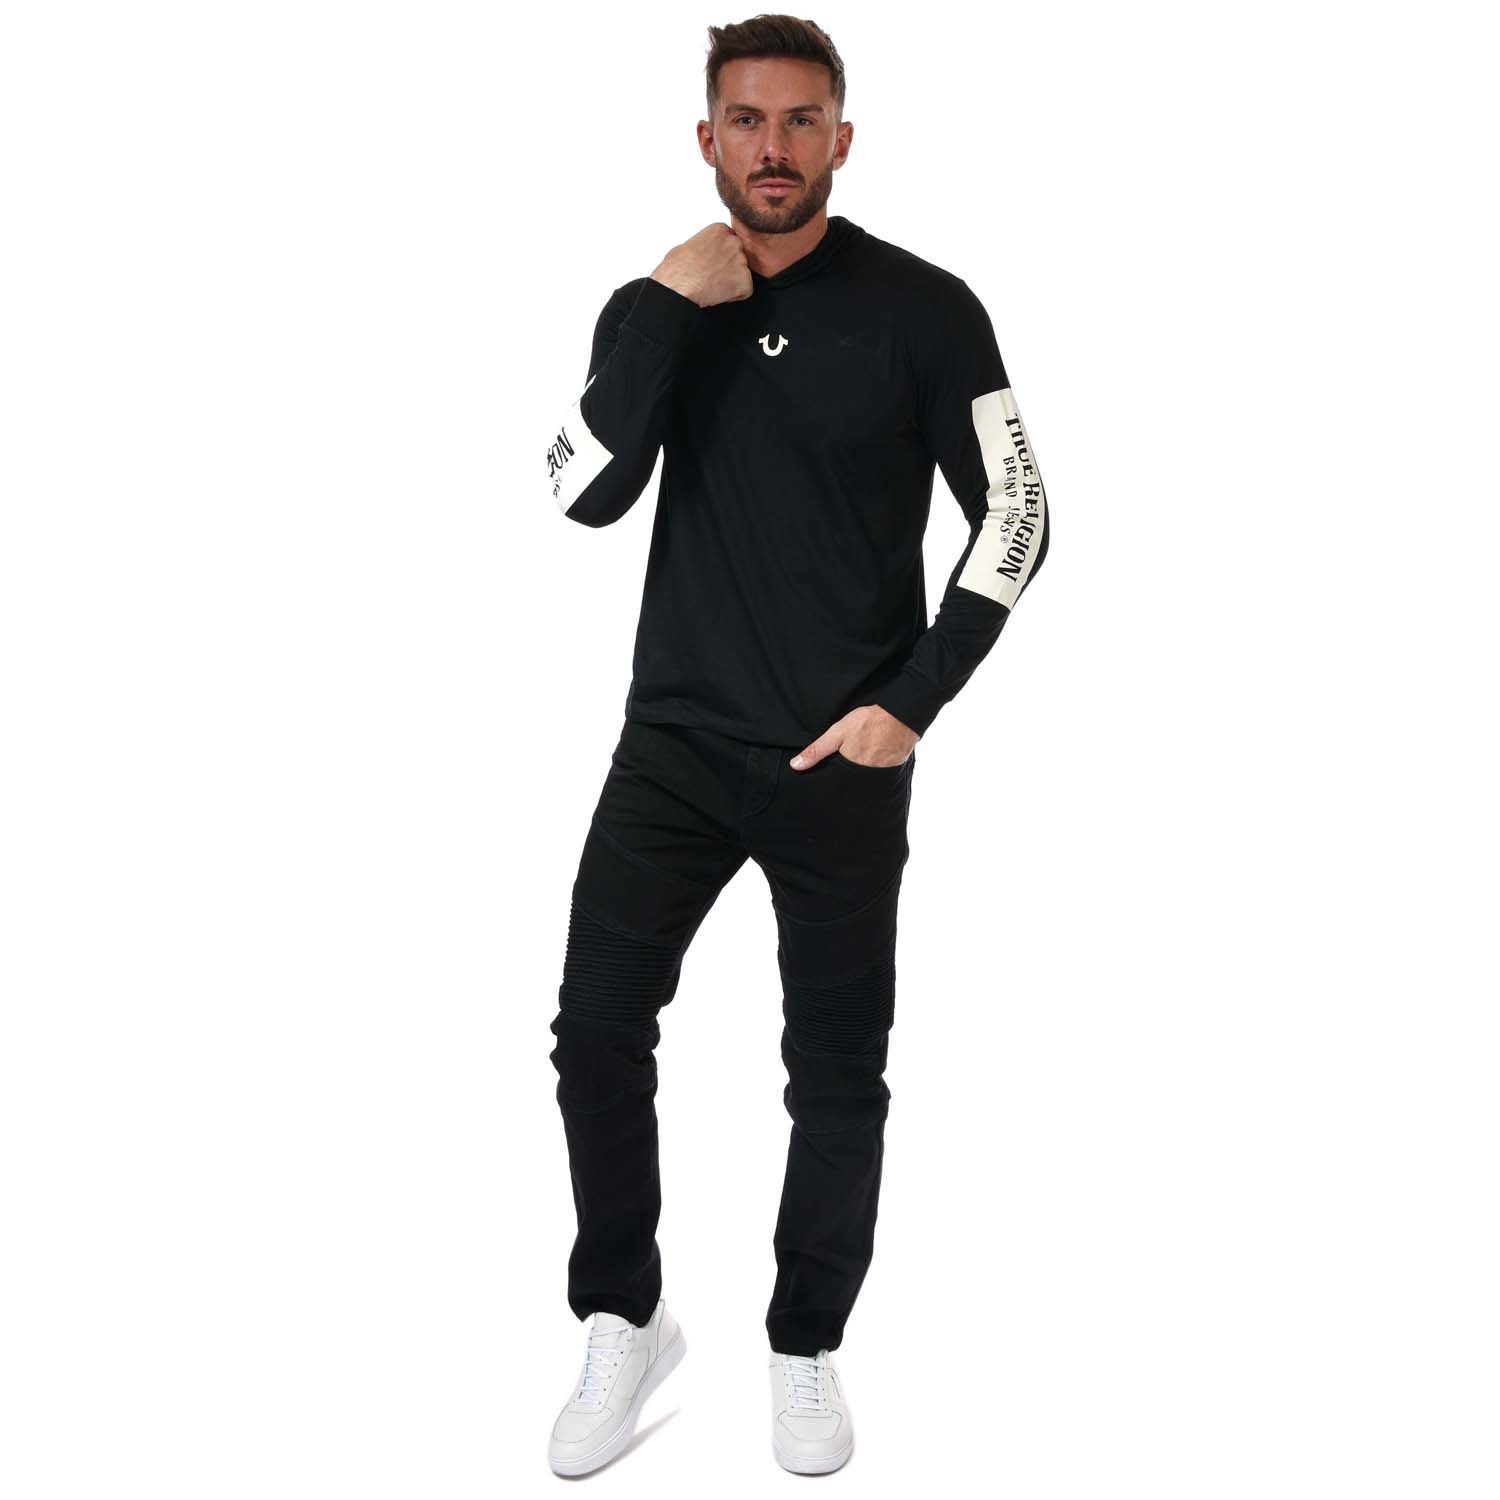 Mens True Religion Hooded Long Sleeve Logo T- Shirt in black.- Hooded neckline.- Long sleeves.- Ribbed cuffs.- Horseshoe logo at the chest and True Religion lettering design down the sleeve.- Regular fit.- 60% Cotton  40% Polyester. Machine washable.- Ref: 1055621001